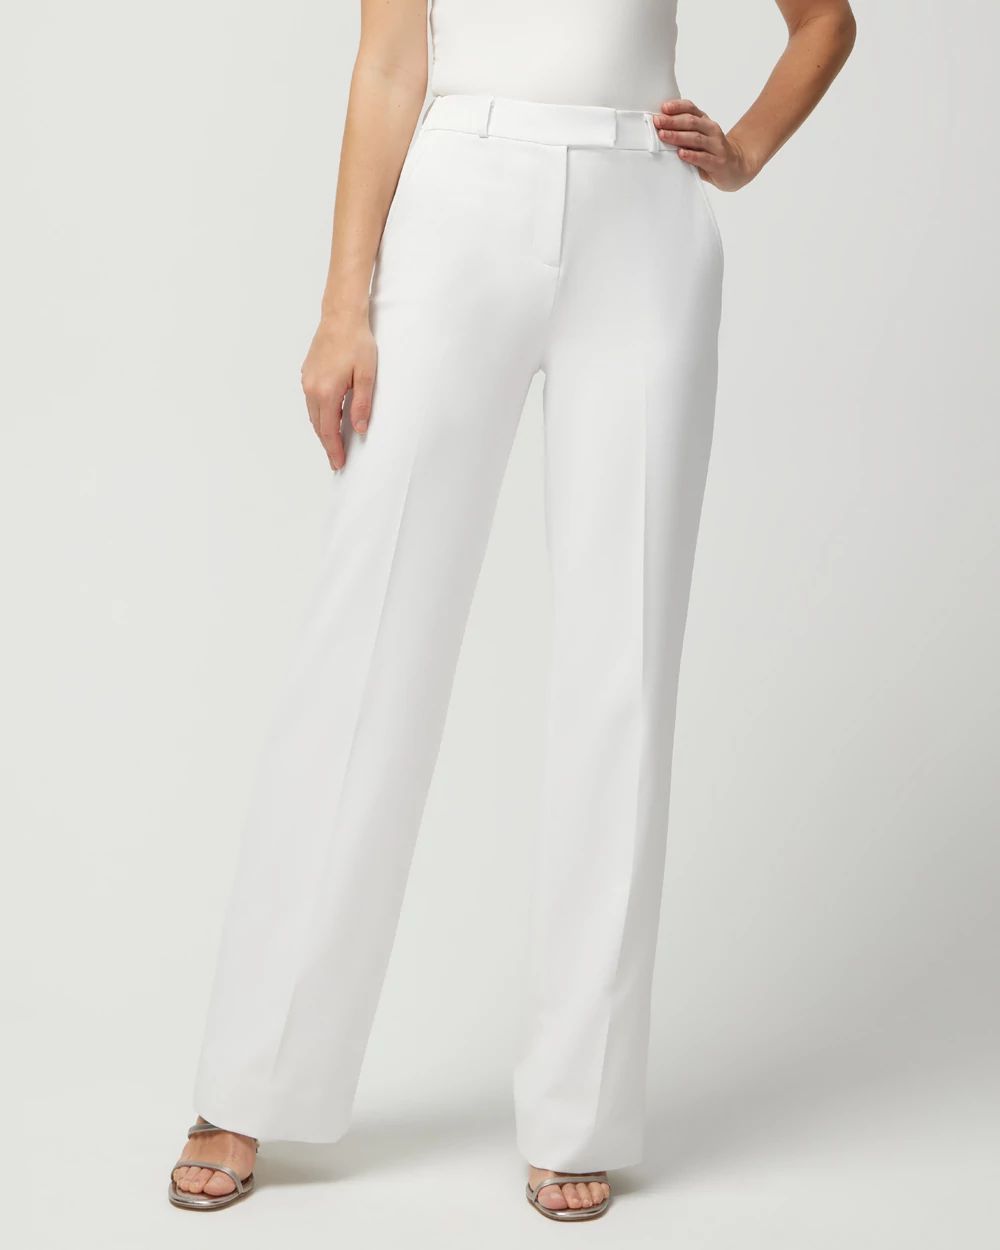 Petite WHBM® Luna Wide Leg Trouser click to view larger image.